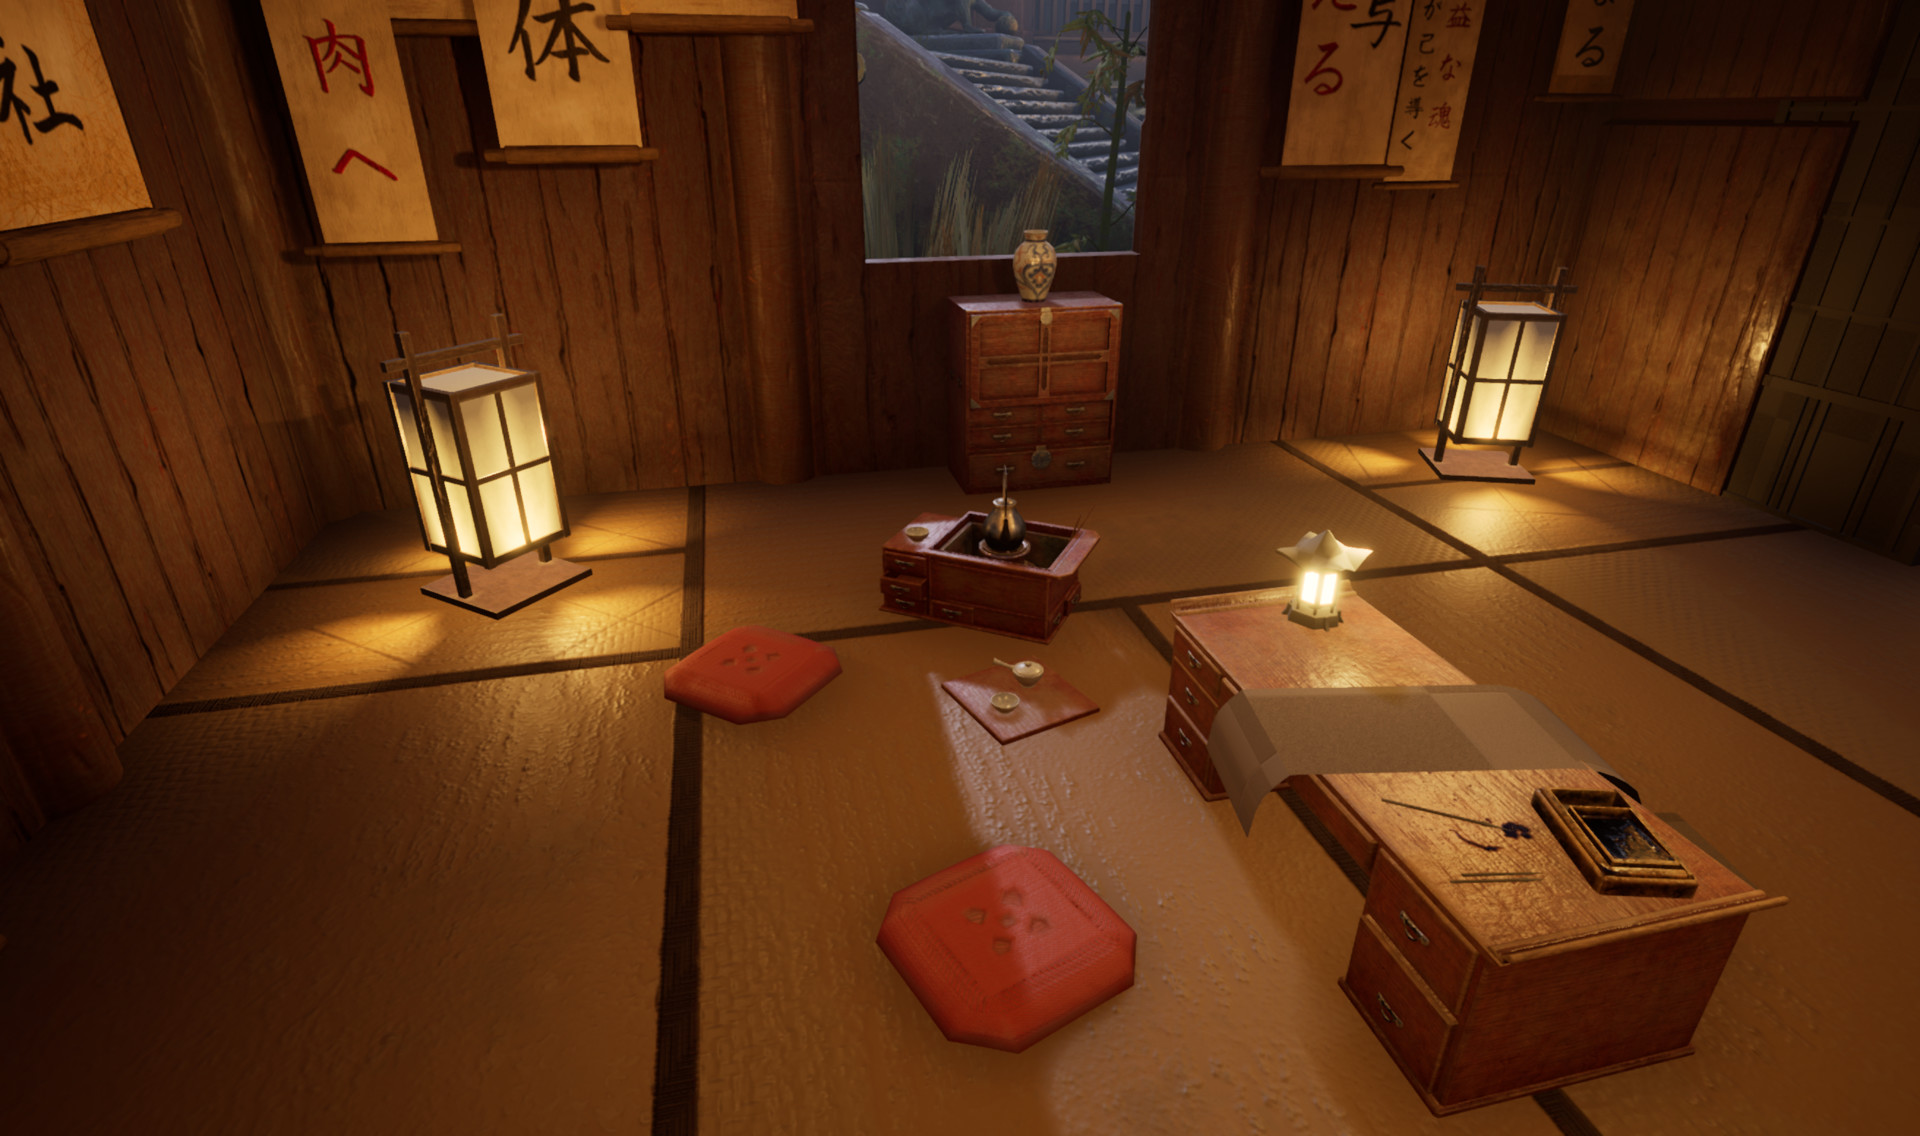 Screenshot inside the calligraphers hut. Shows the writing desk. Behind it there are now 2 red sitting pillows. Next to them is a little tea set.